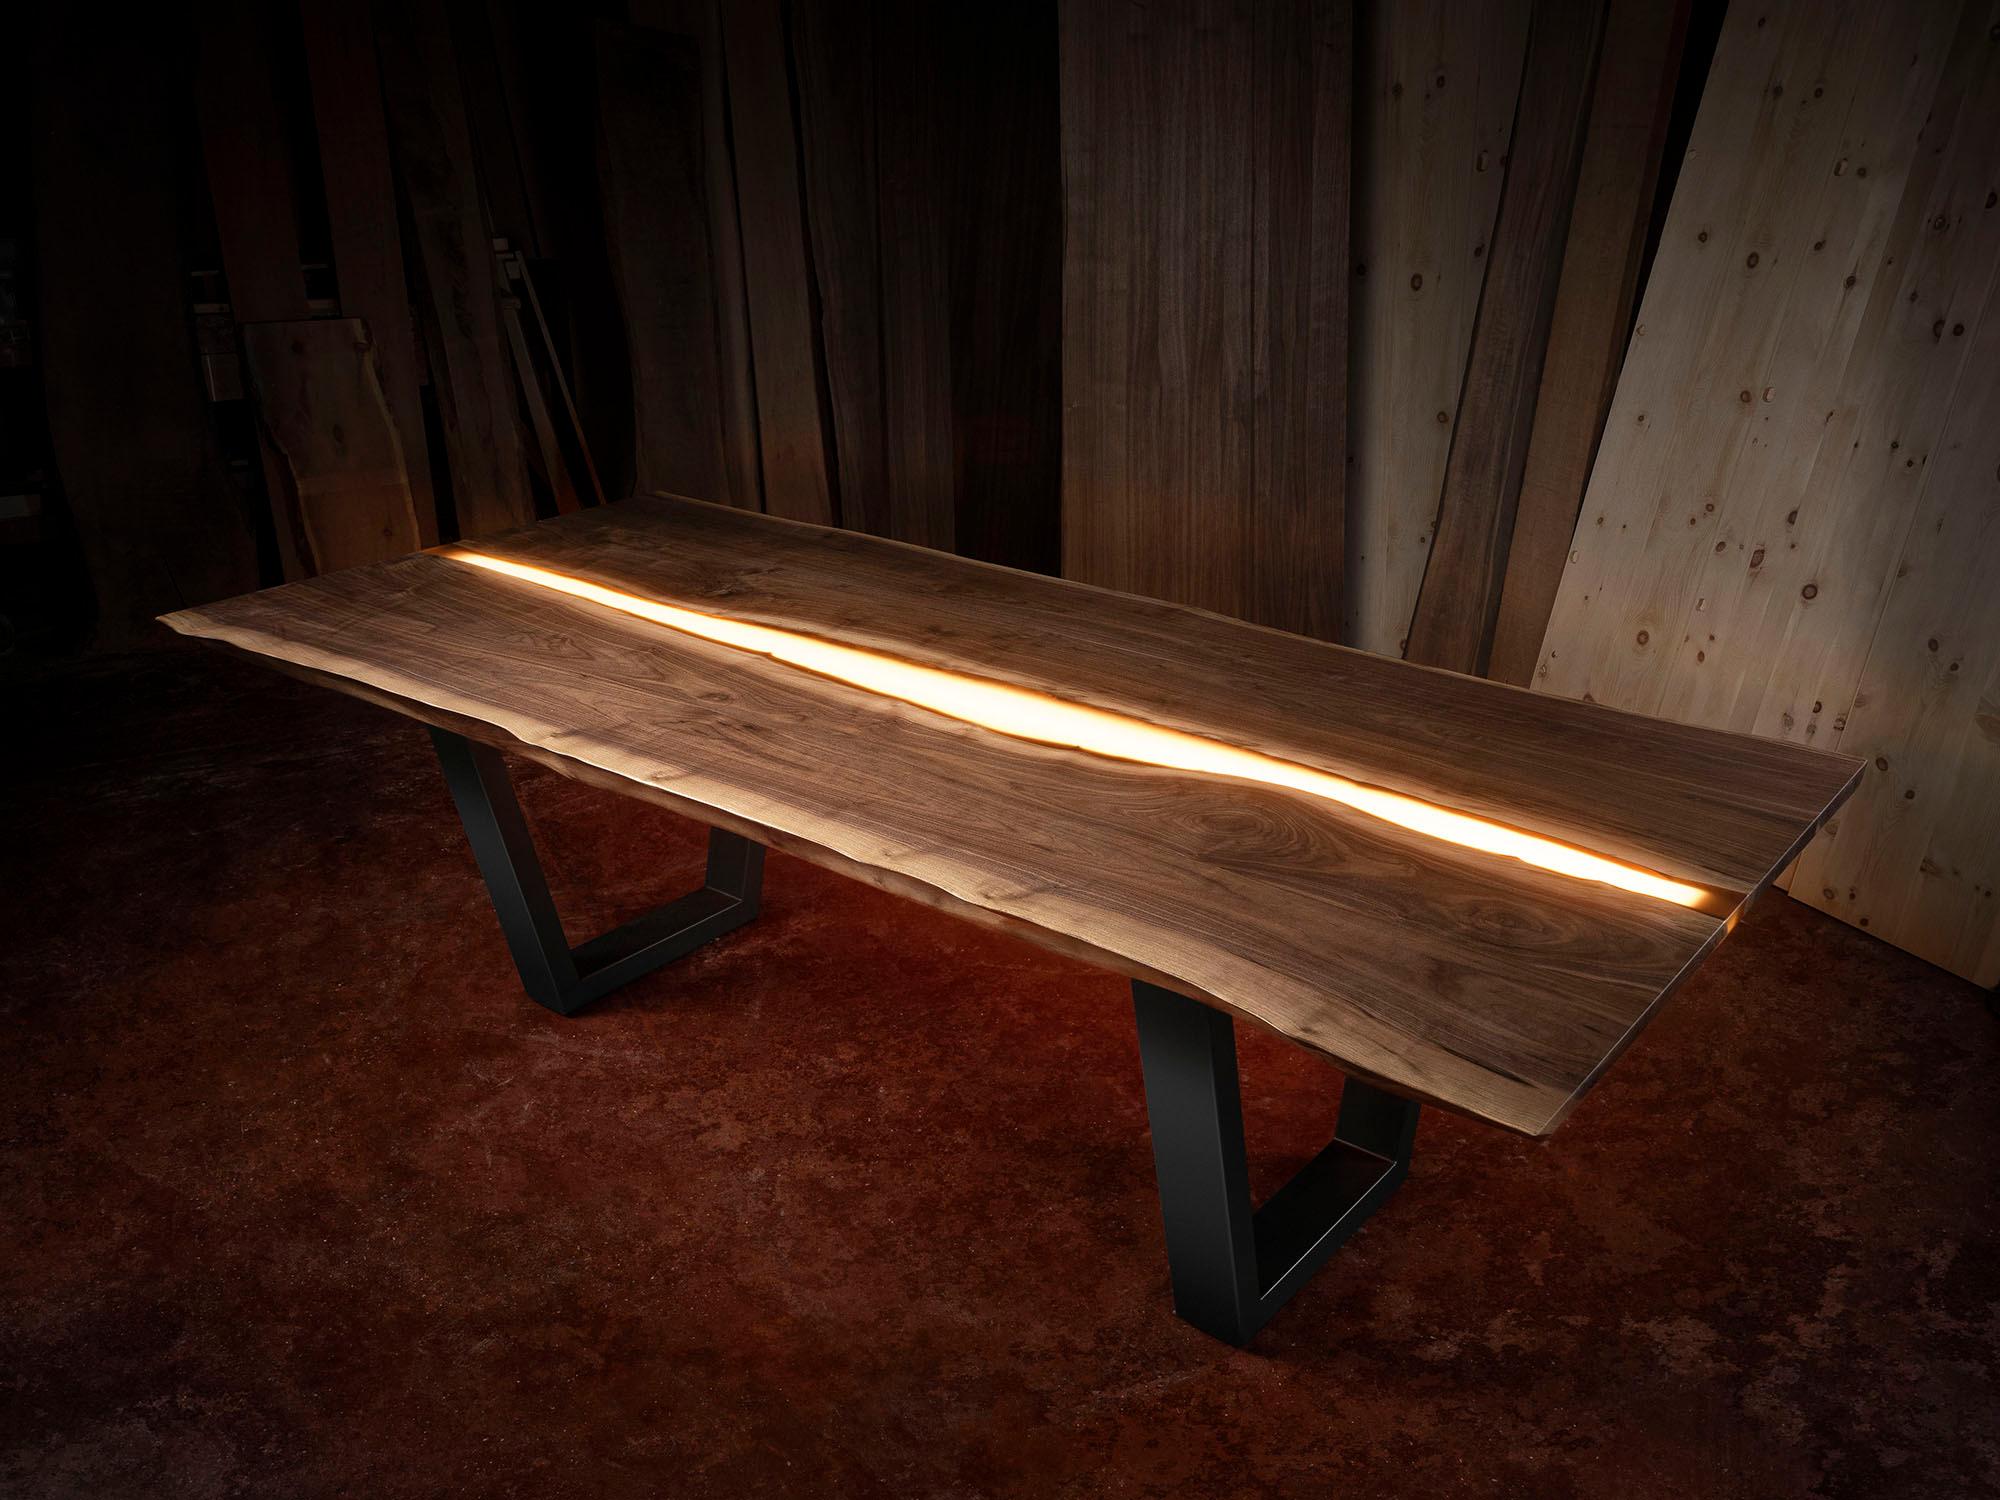 A Day In The Life Table by Francesco Profili
Dimensions: W 250 x D 125 x H 79 cm 
Materials: Walnut, Iron, Brass, Colored Epoxy Resin, LED.

It is the synthesis between quality and beauty of the materials.
The table is made up by two parts in solid